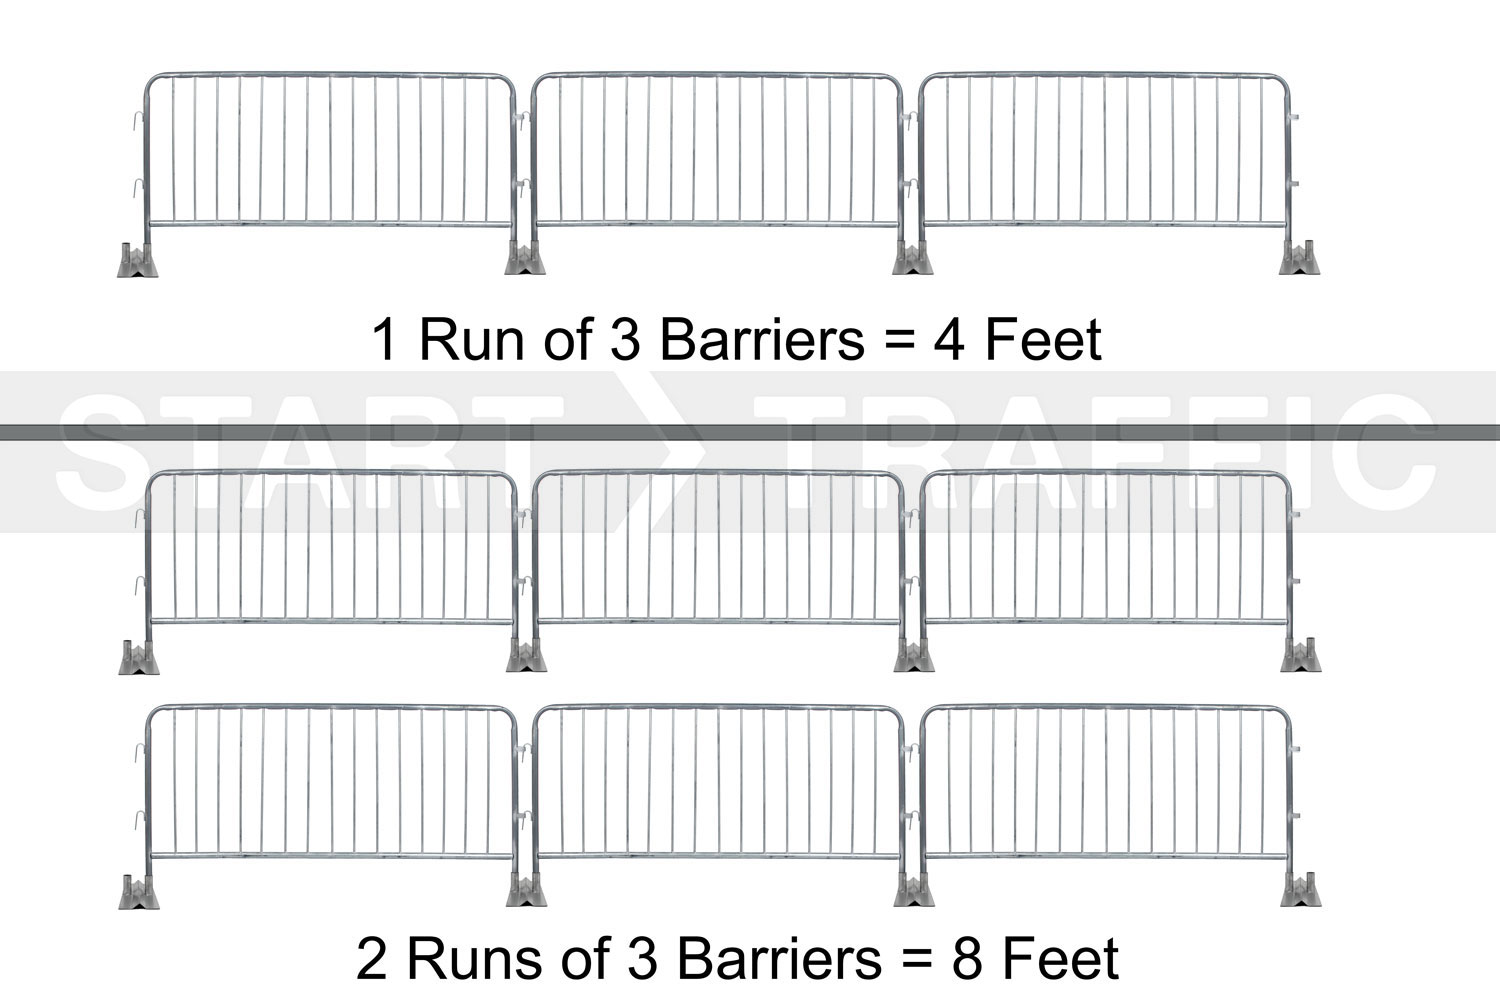 Diagram showing how many feet you would require for barrier runs